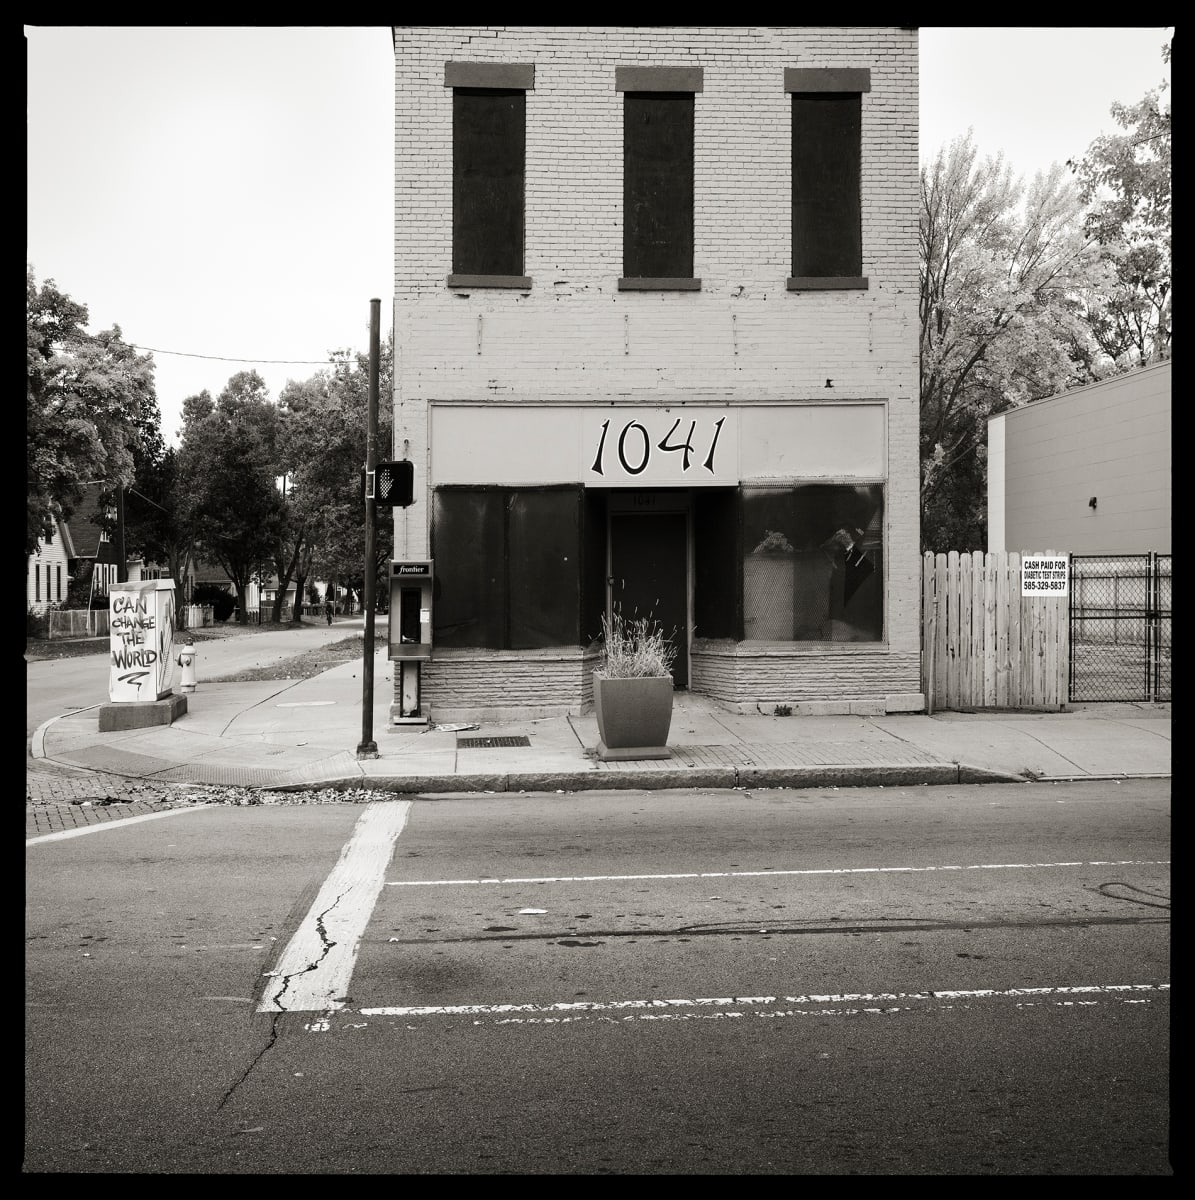 Unknown Number – 1041 North Clinton Avenue, Rochester, NY 14621 by Eric T. Kunsman  Image: ID: A black and white image shows a rectangular building that is closed.  The building is on a corner of a street.  There is a payphone located on the left side of the building's face.  There is also a potted plant in front of the building.